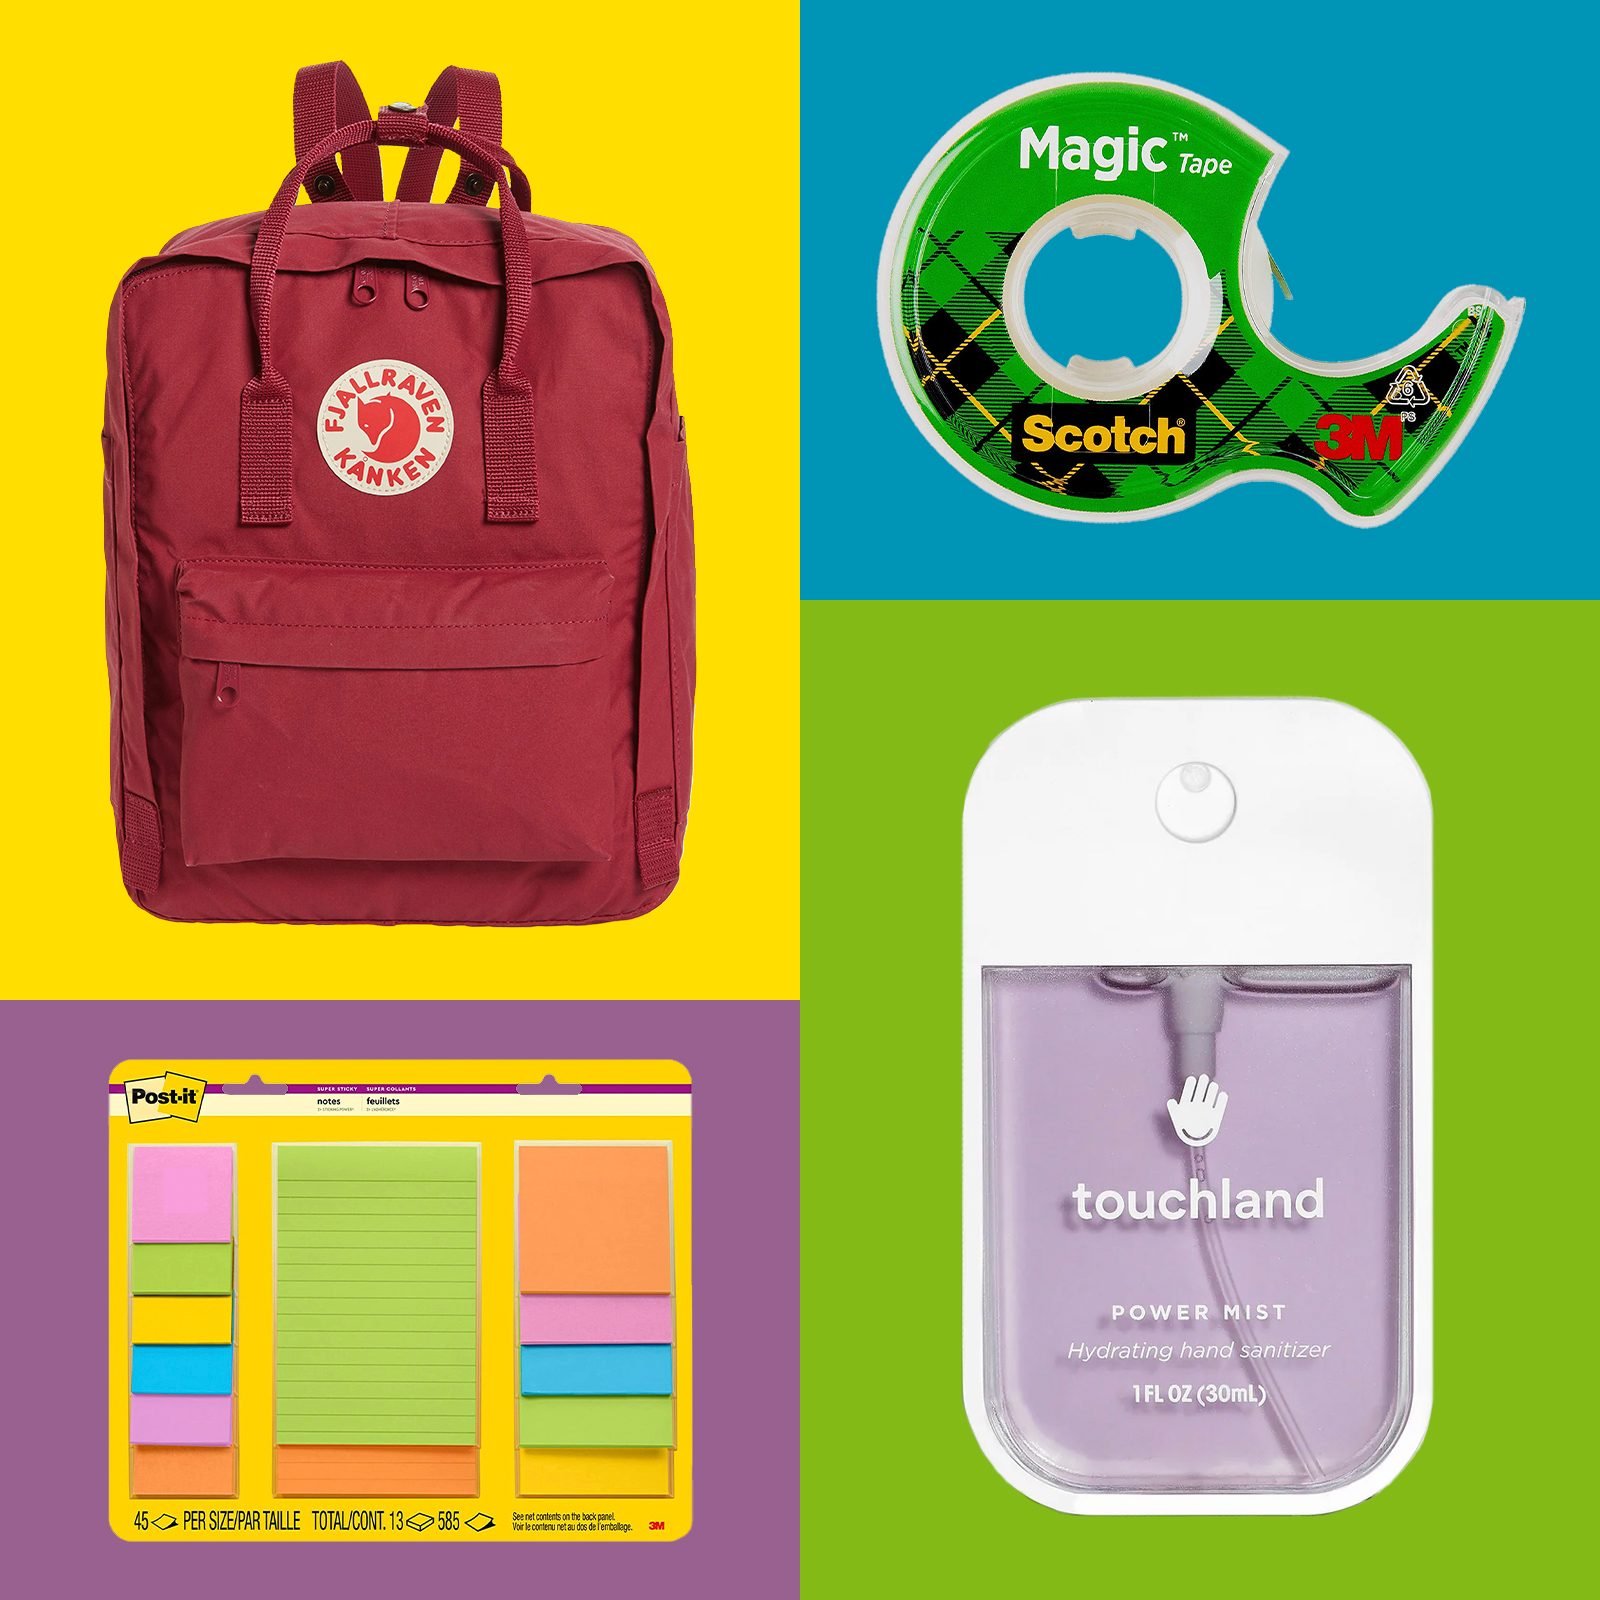 https://www.rd.com/wp-content/uploads/2022/07/60-Back-to-School-Supplies-Every-Student-Needs-FT.jpg